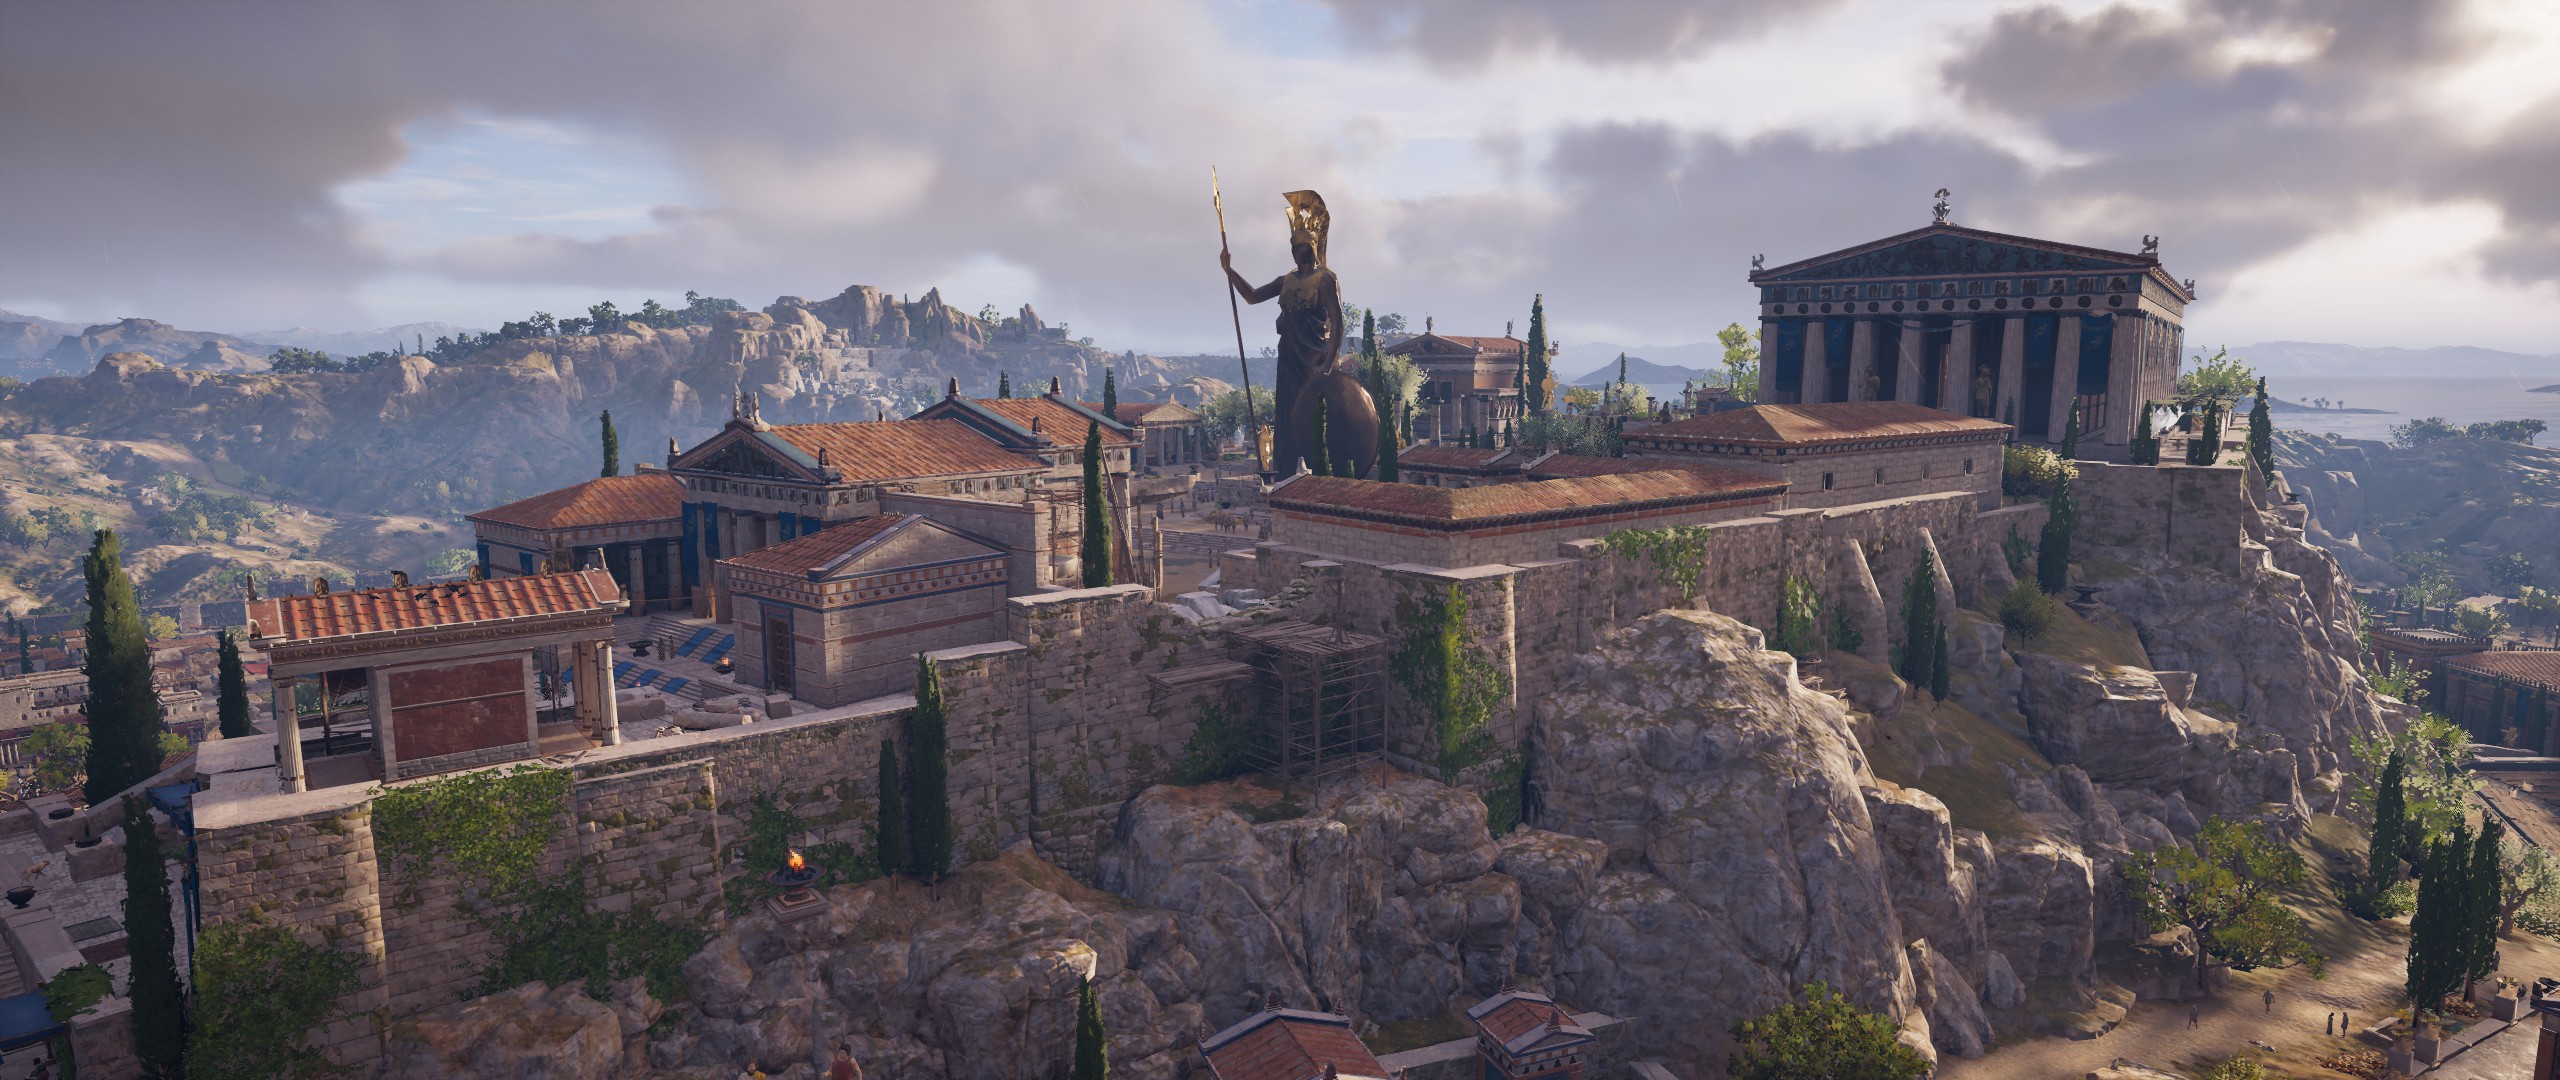 Akropolis Sanctuary, Assassin's Creed Wiki